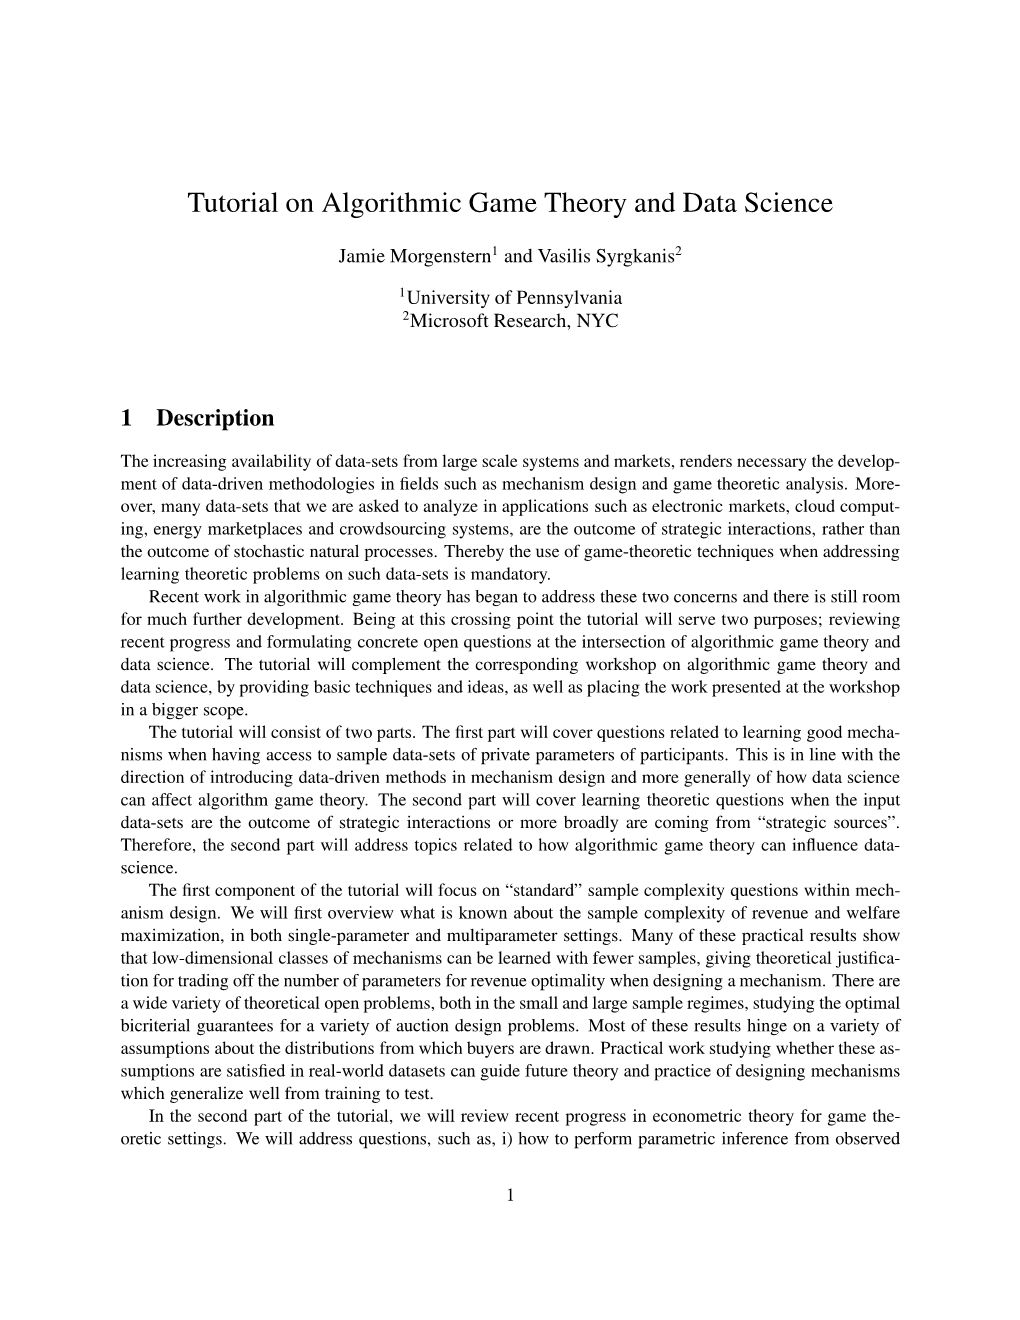 Algorithmic Game Theory and Data Science